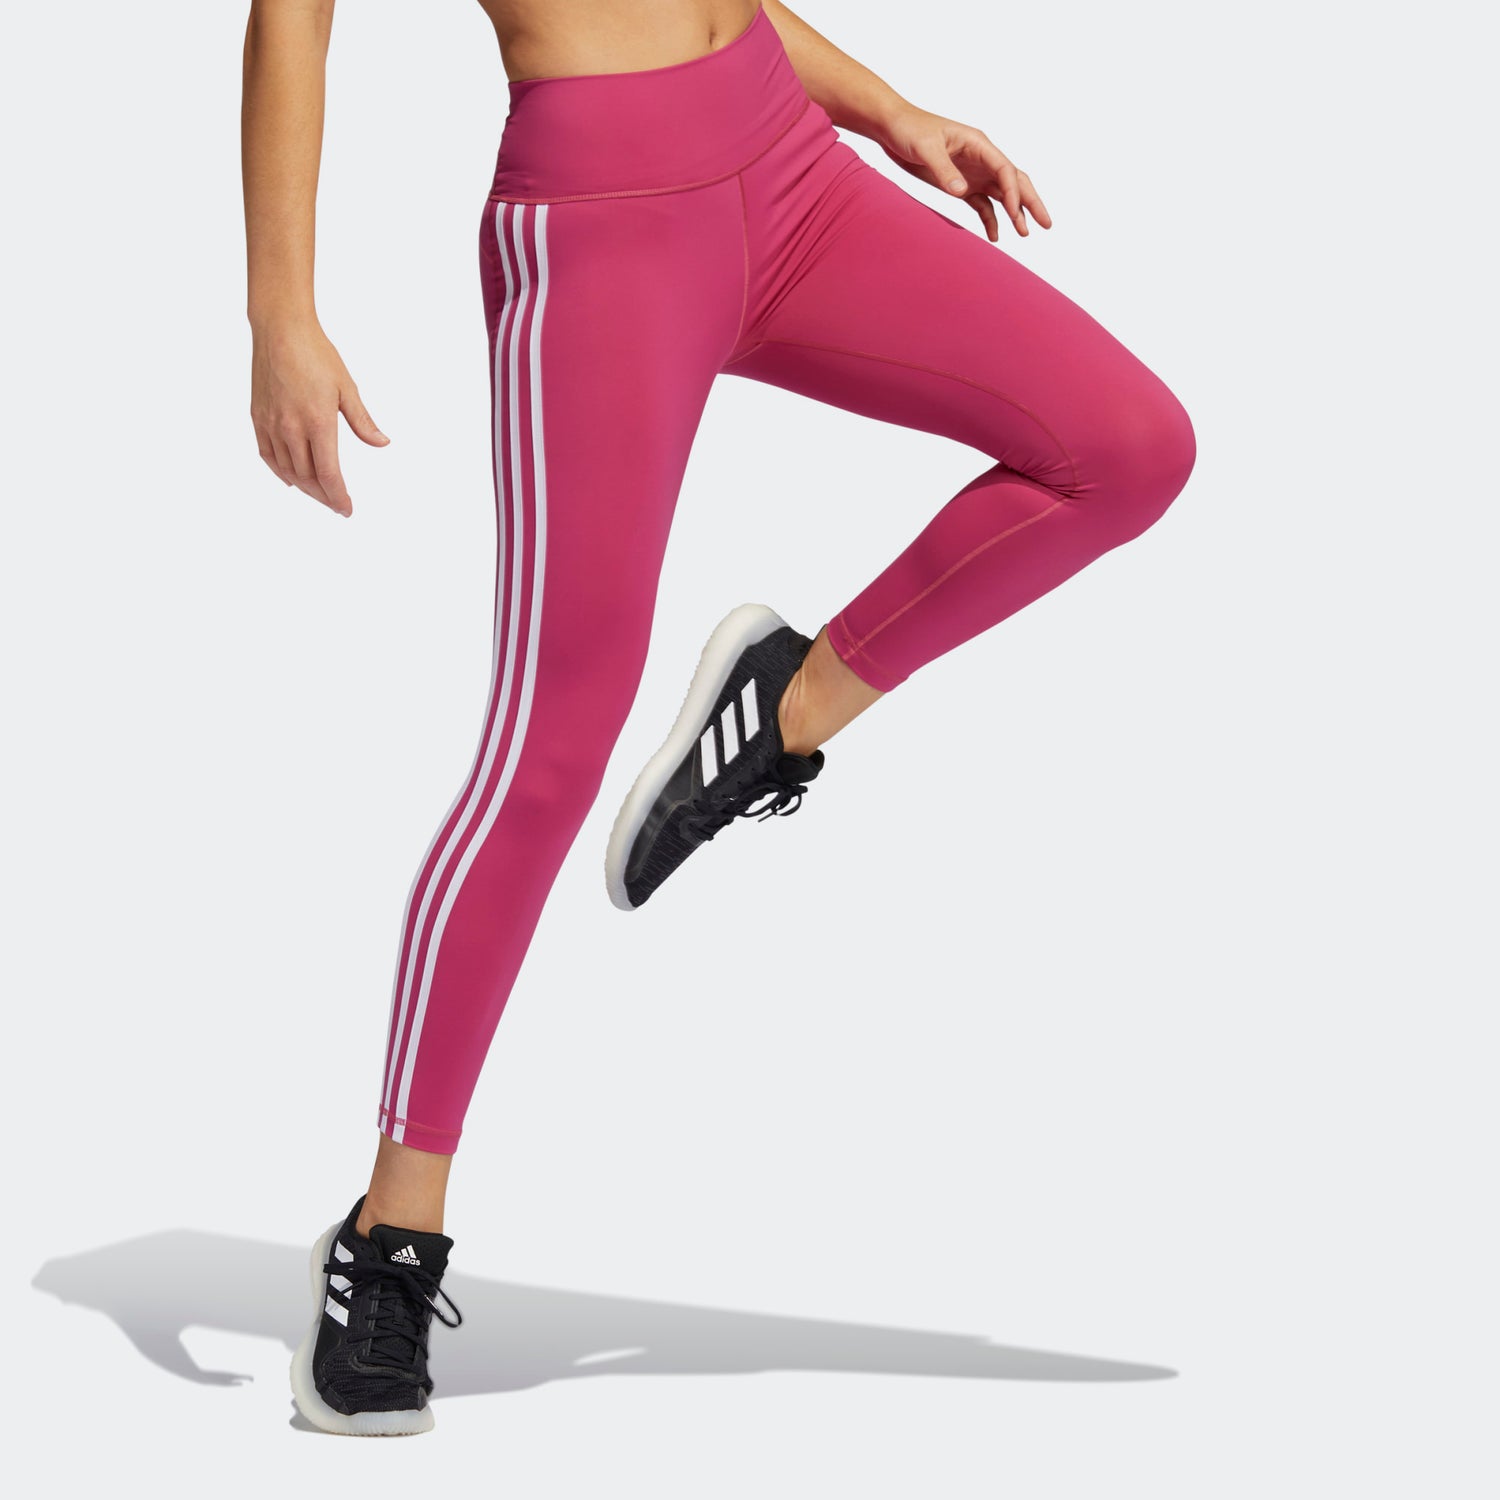 adidas Women's Believe This High-Rise 7/8 Tights, Leggings -  Canada